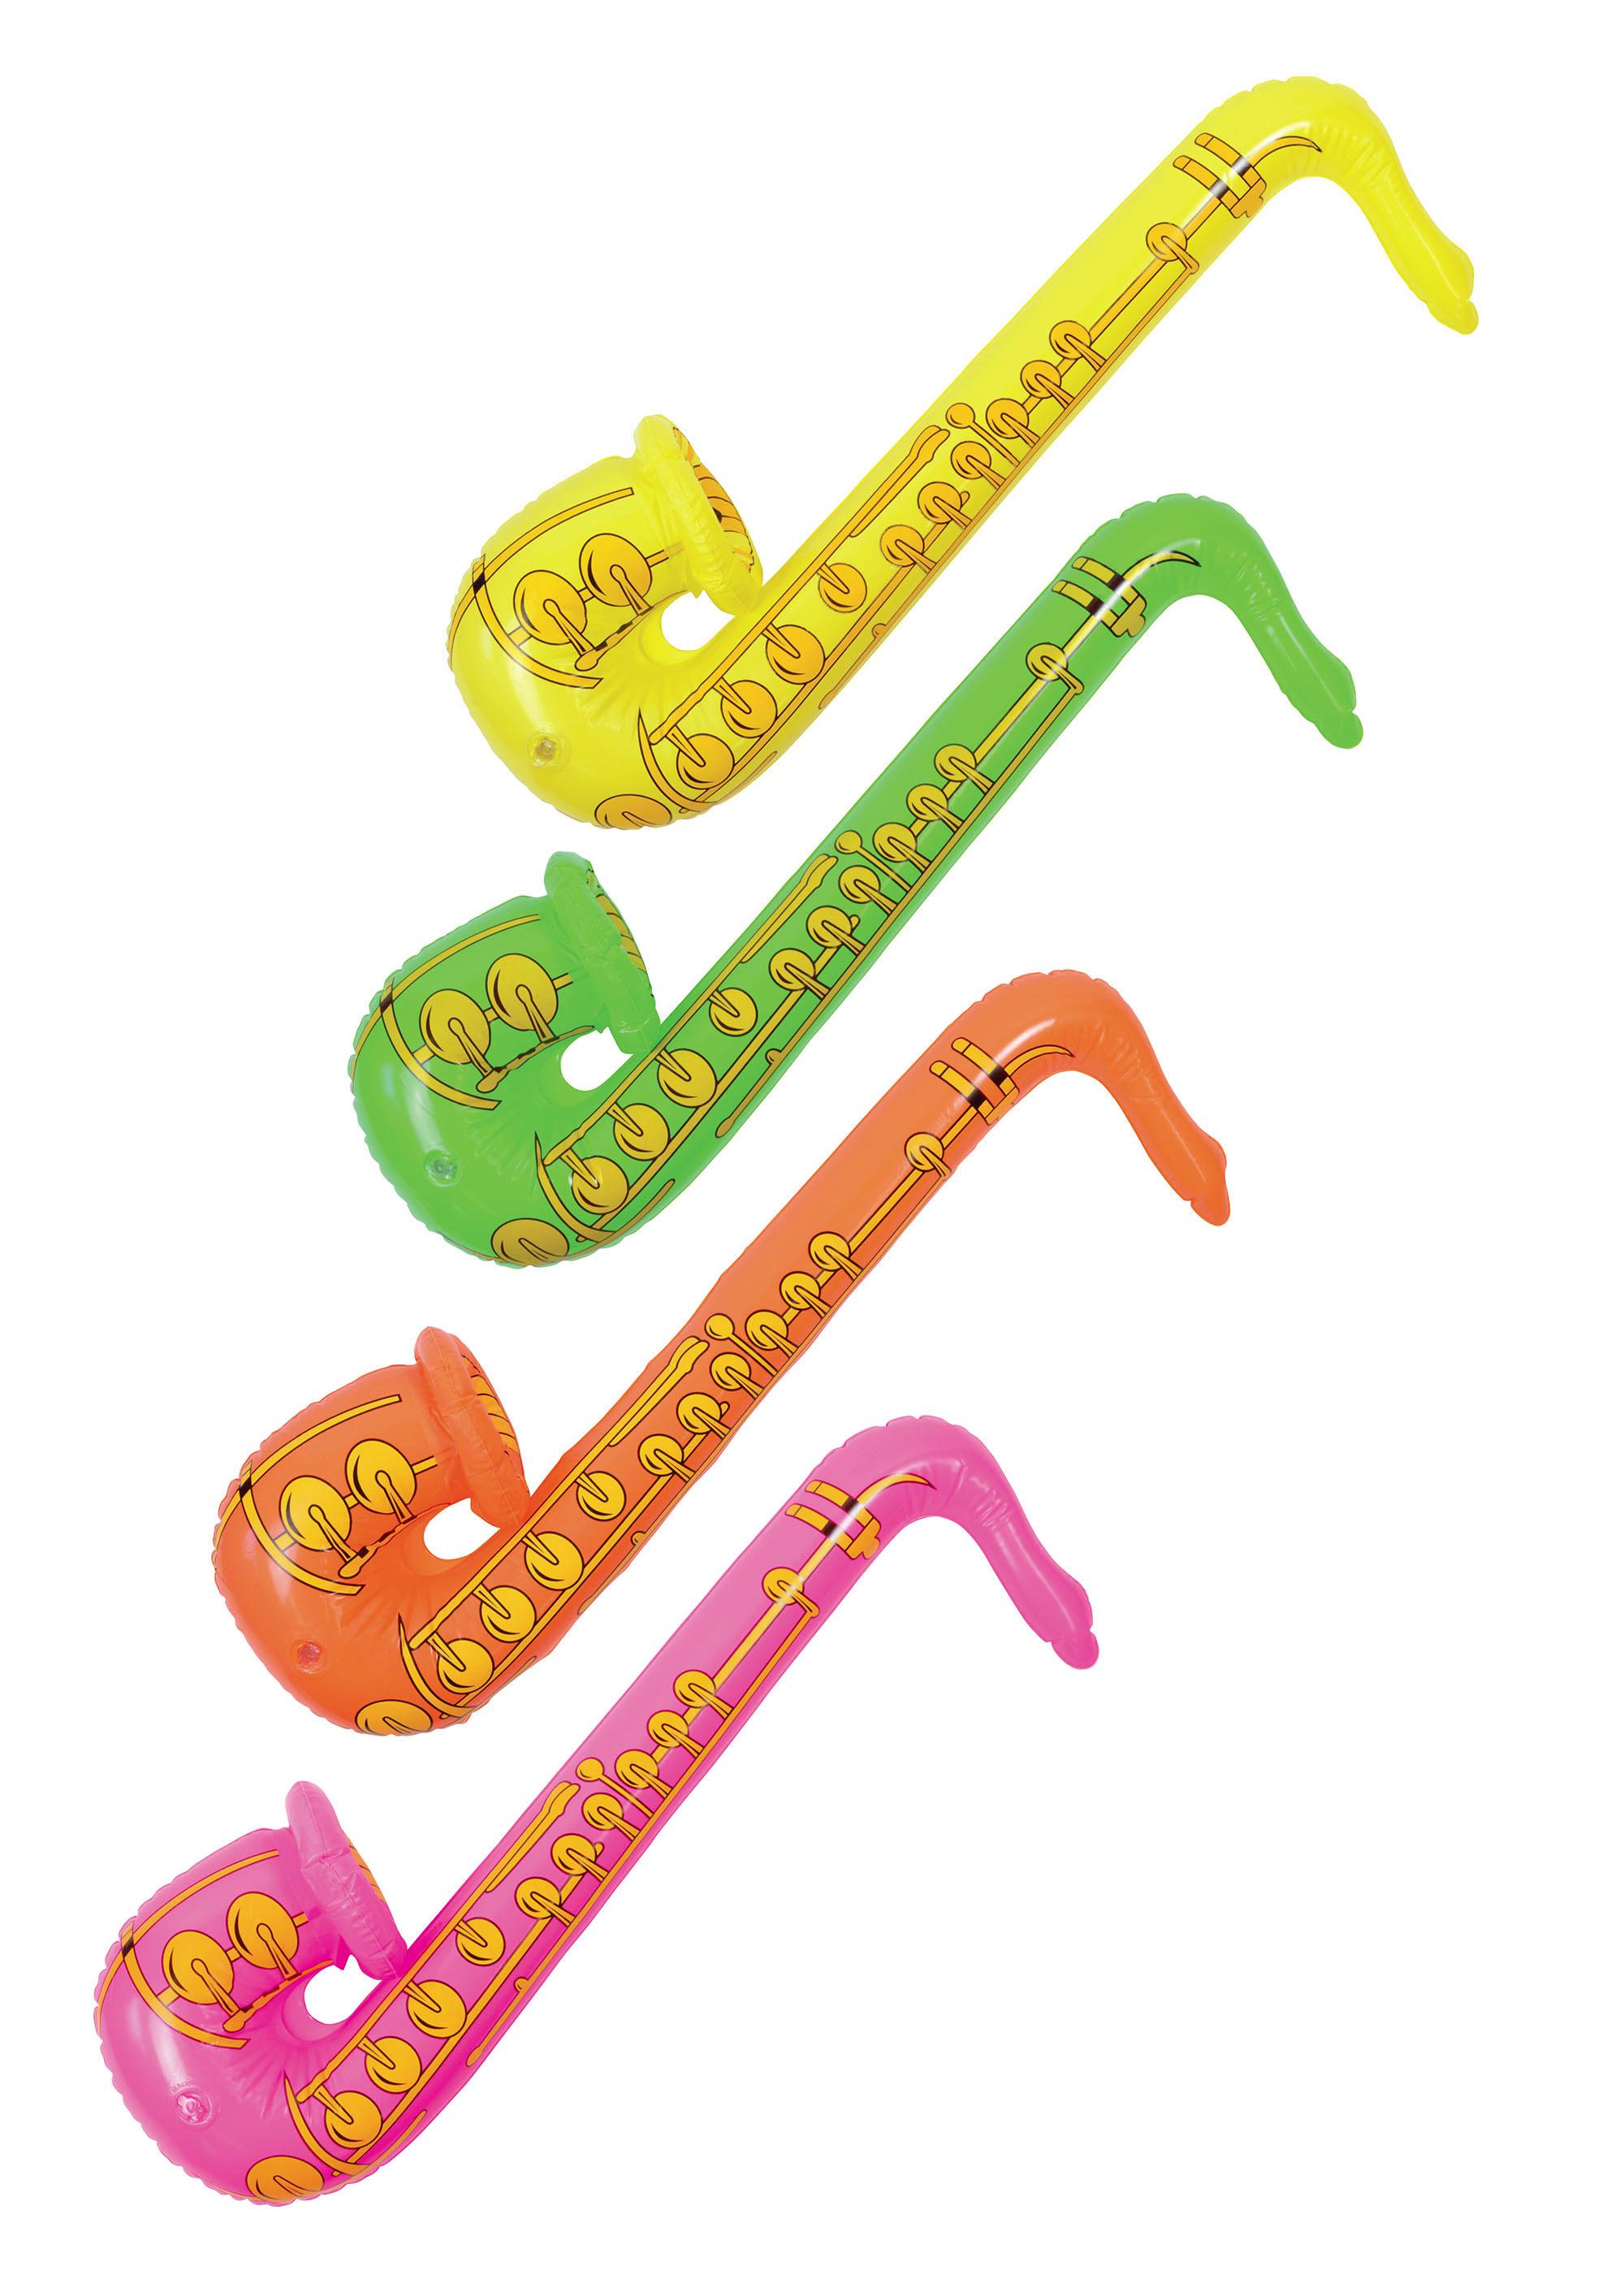 Inflatable Saxaphone by Bristol Novelties IJ012 available here at Karnival Costumes online party shop